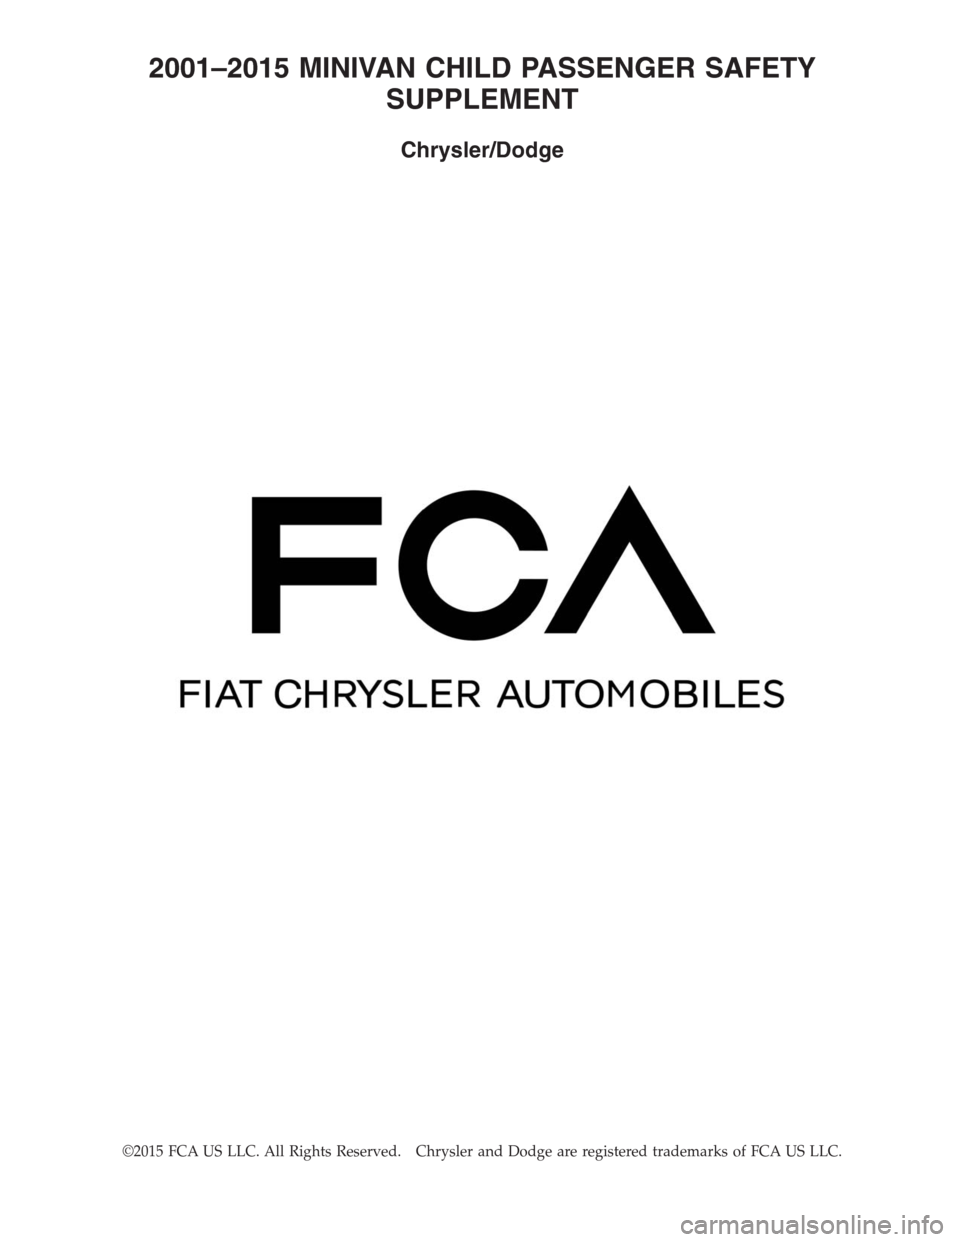 CHRYSLER TOWN AND COUNTRY 2014 5.G Warranty Booklet 2001–2015 MINIVAN CHILD PASSENGER SAFETY
SUPPLEMENT
Chrysler/Dodge
©2015 FCA US LLC. All Rights Reserved. Chrysler and Dodge are registered trademarks of FCA US LLC. 